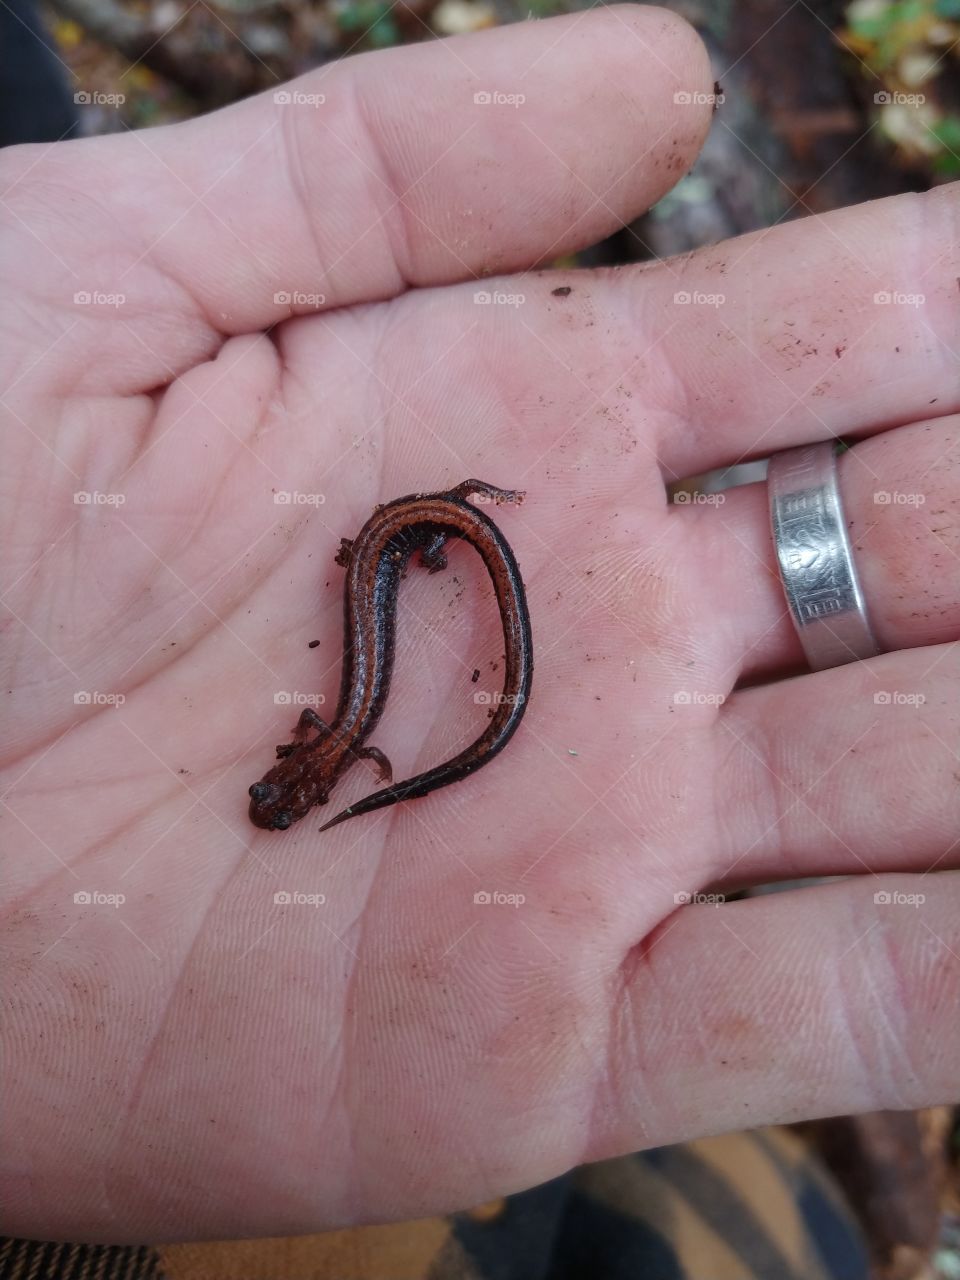 this is a cute salamander only one we saw